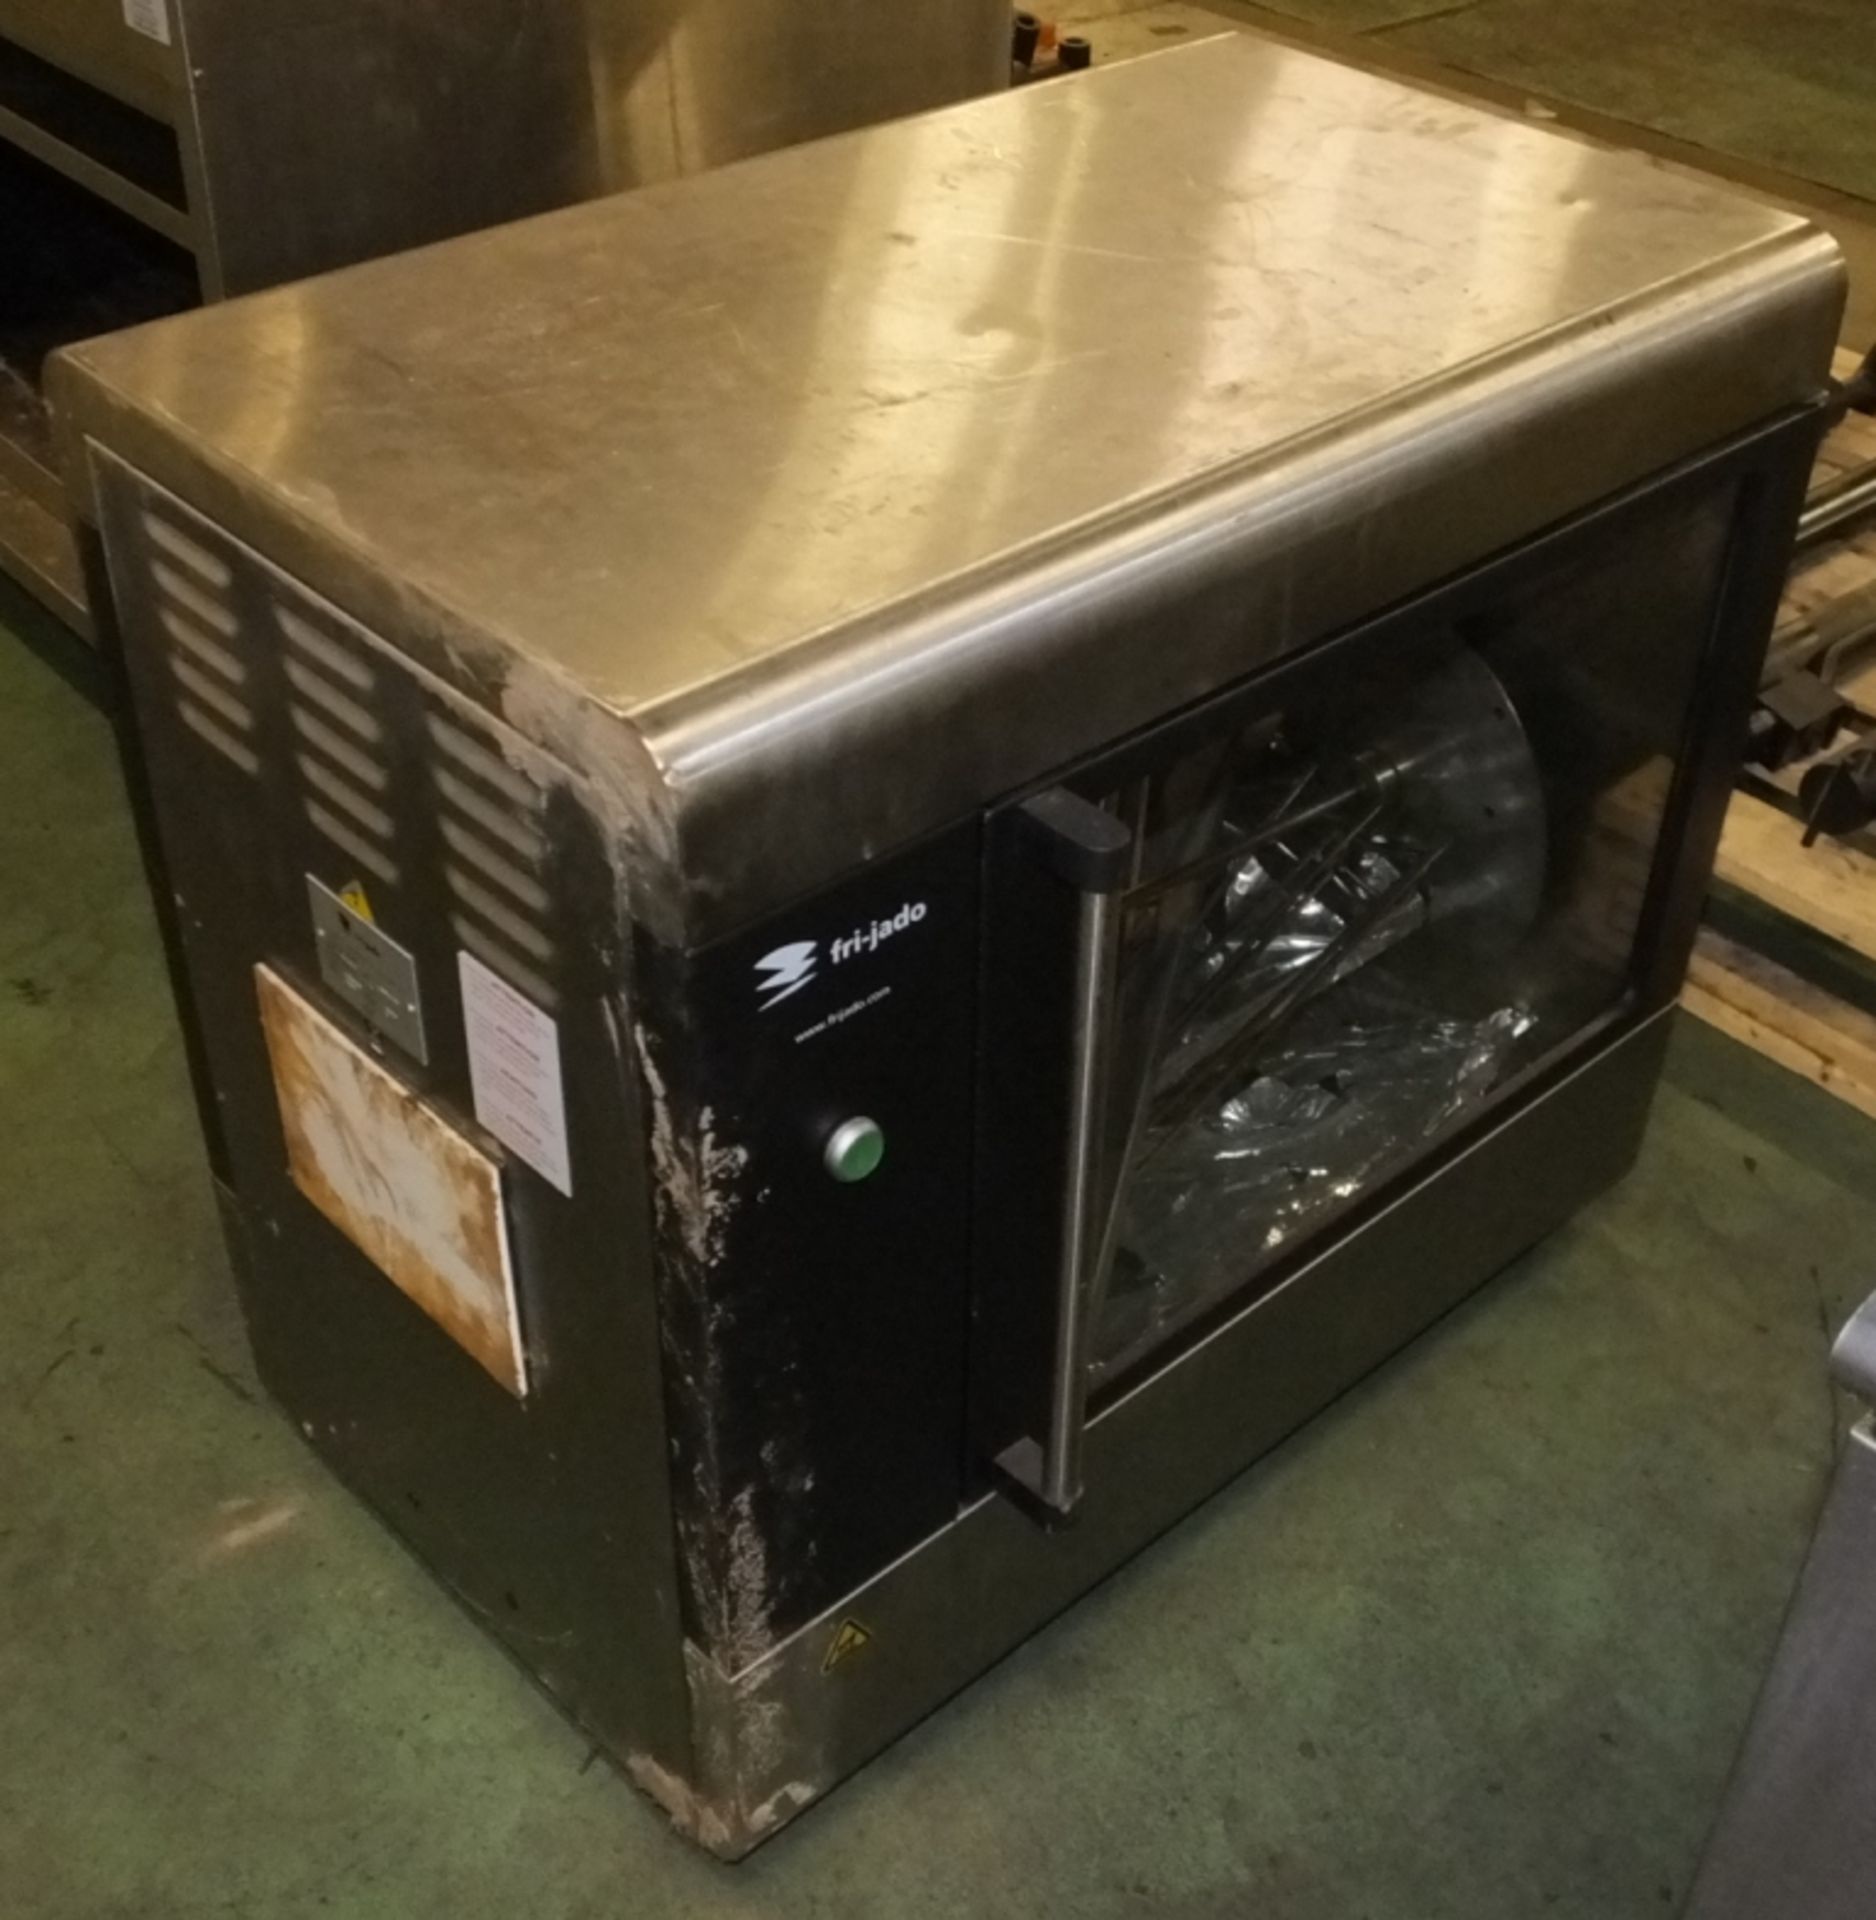 Rotisserie Oven (TF110-M) - Please note there will be a loading fee of £5 on this item - Image 4 of 7